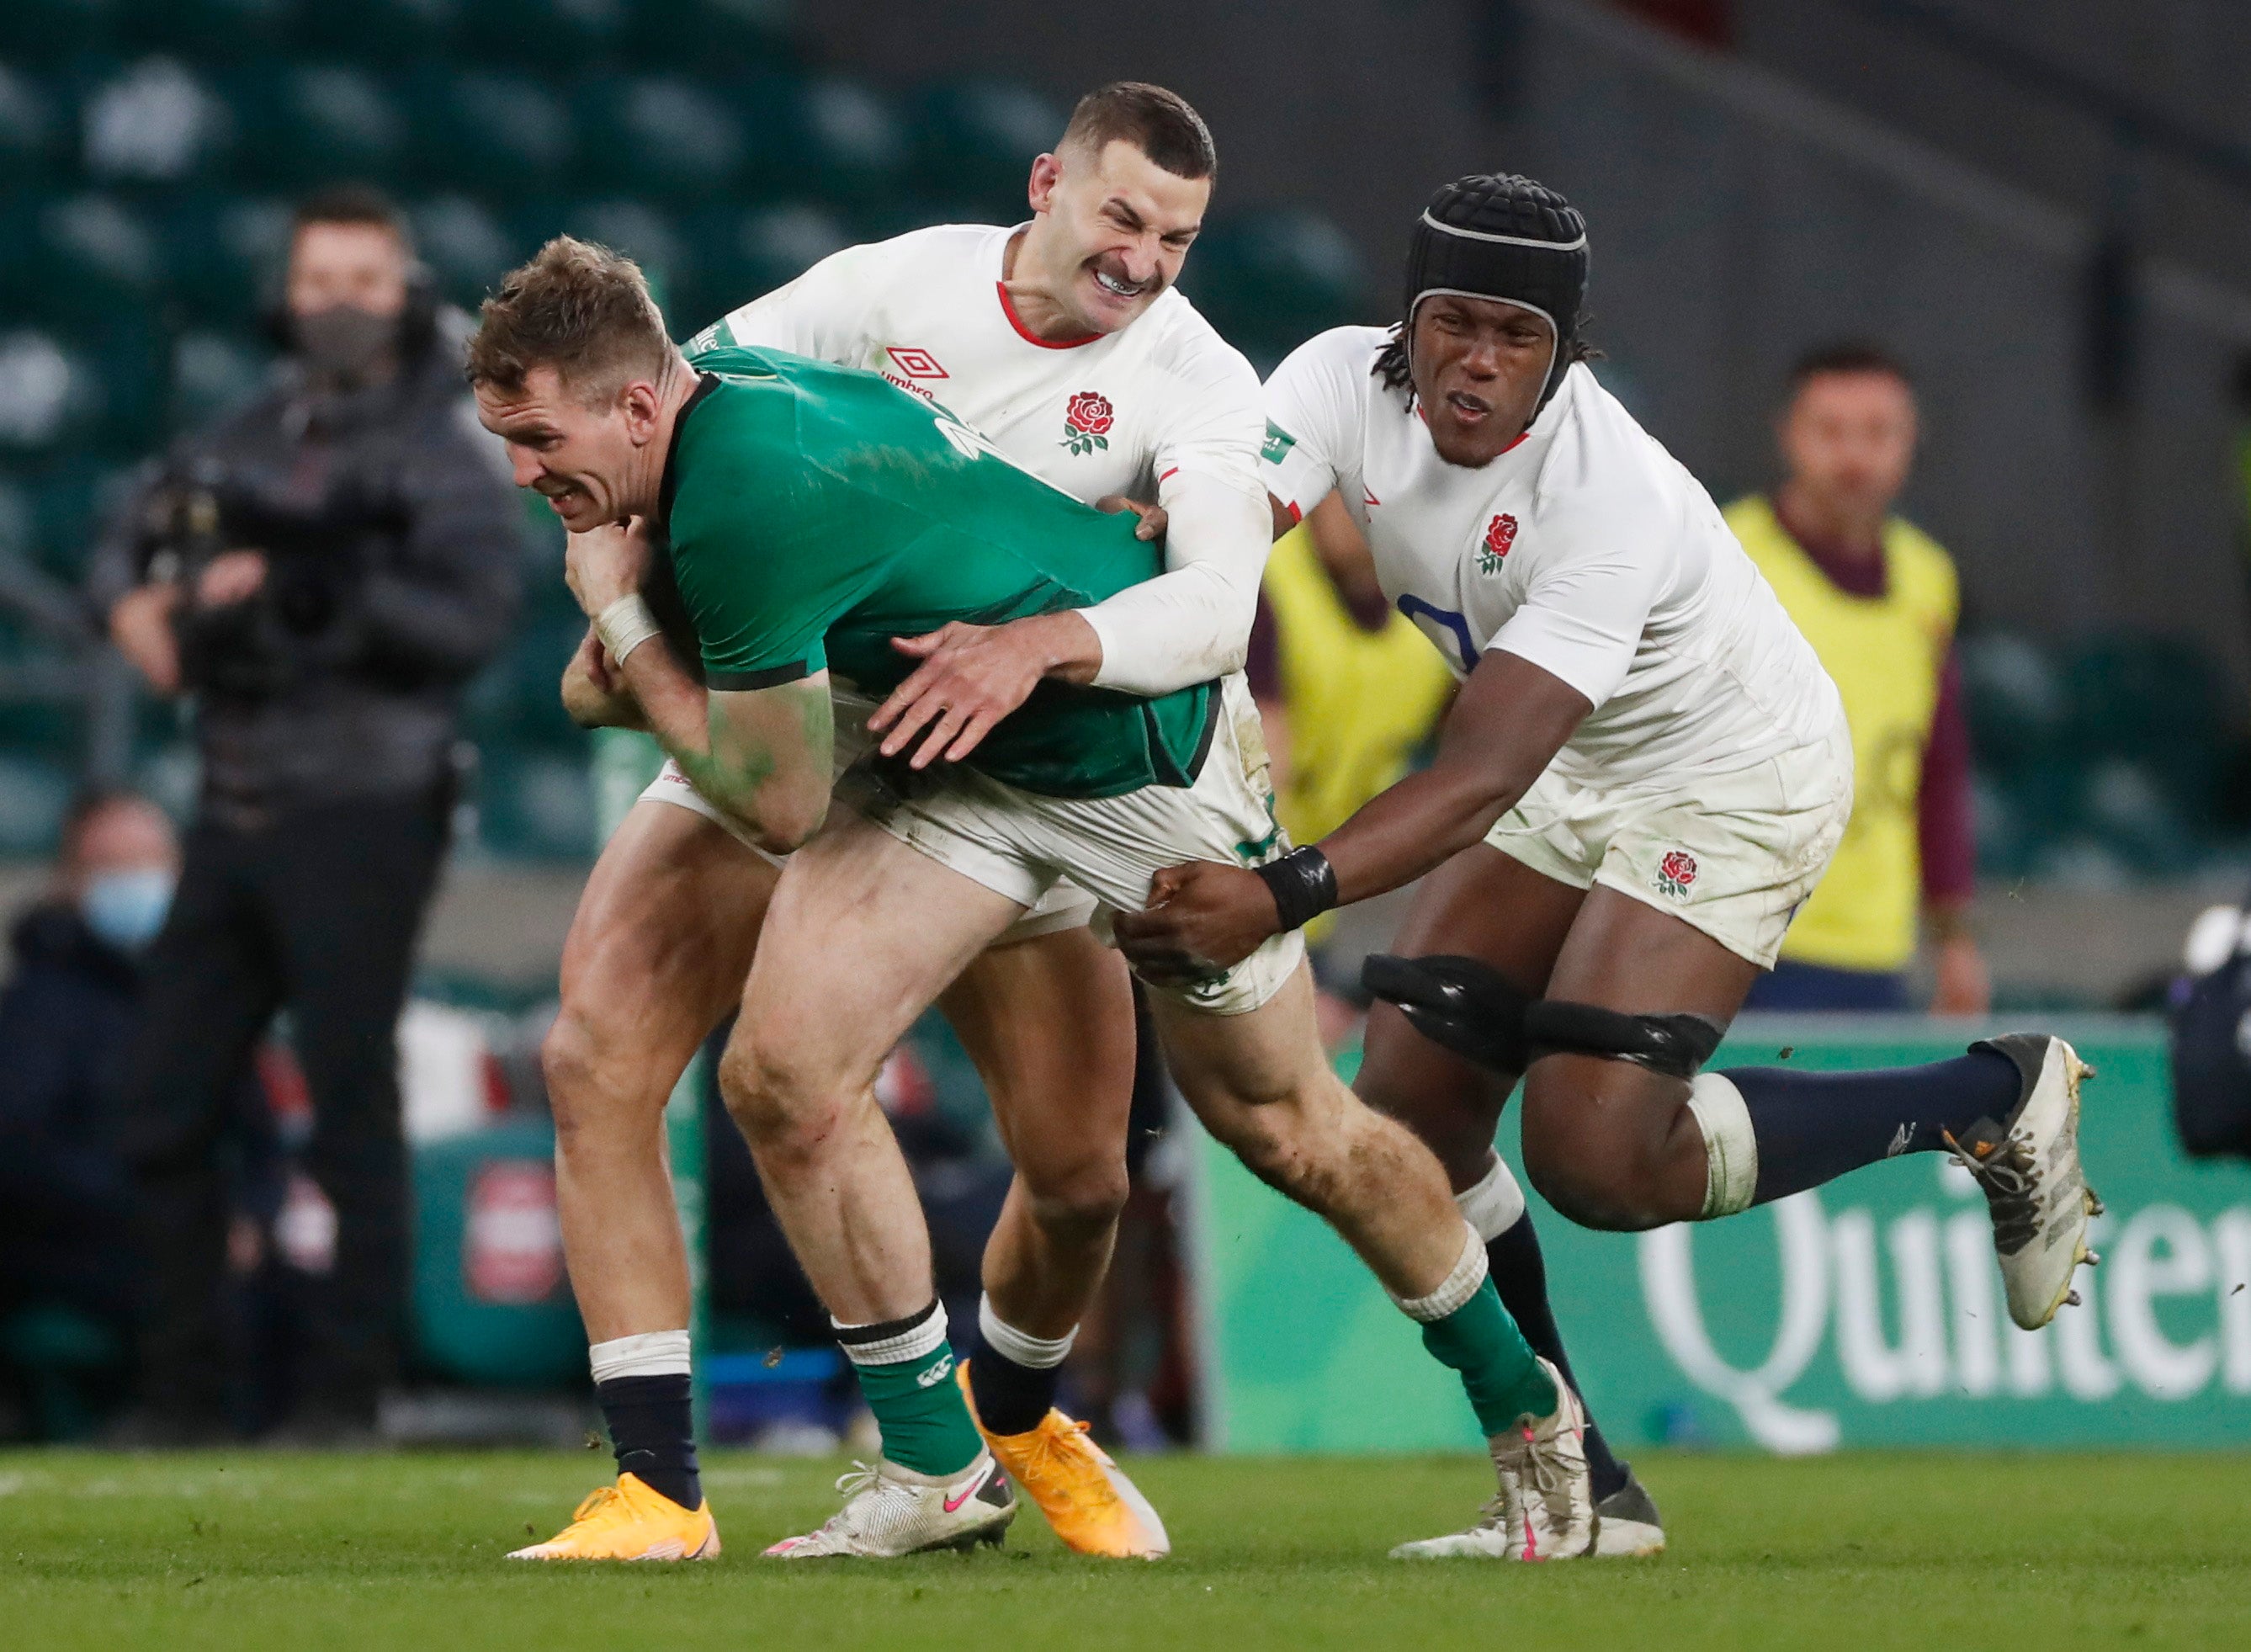 Maro Itoje topped the tackle charts with a monumental 24 challenges